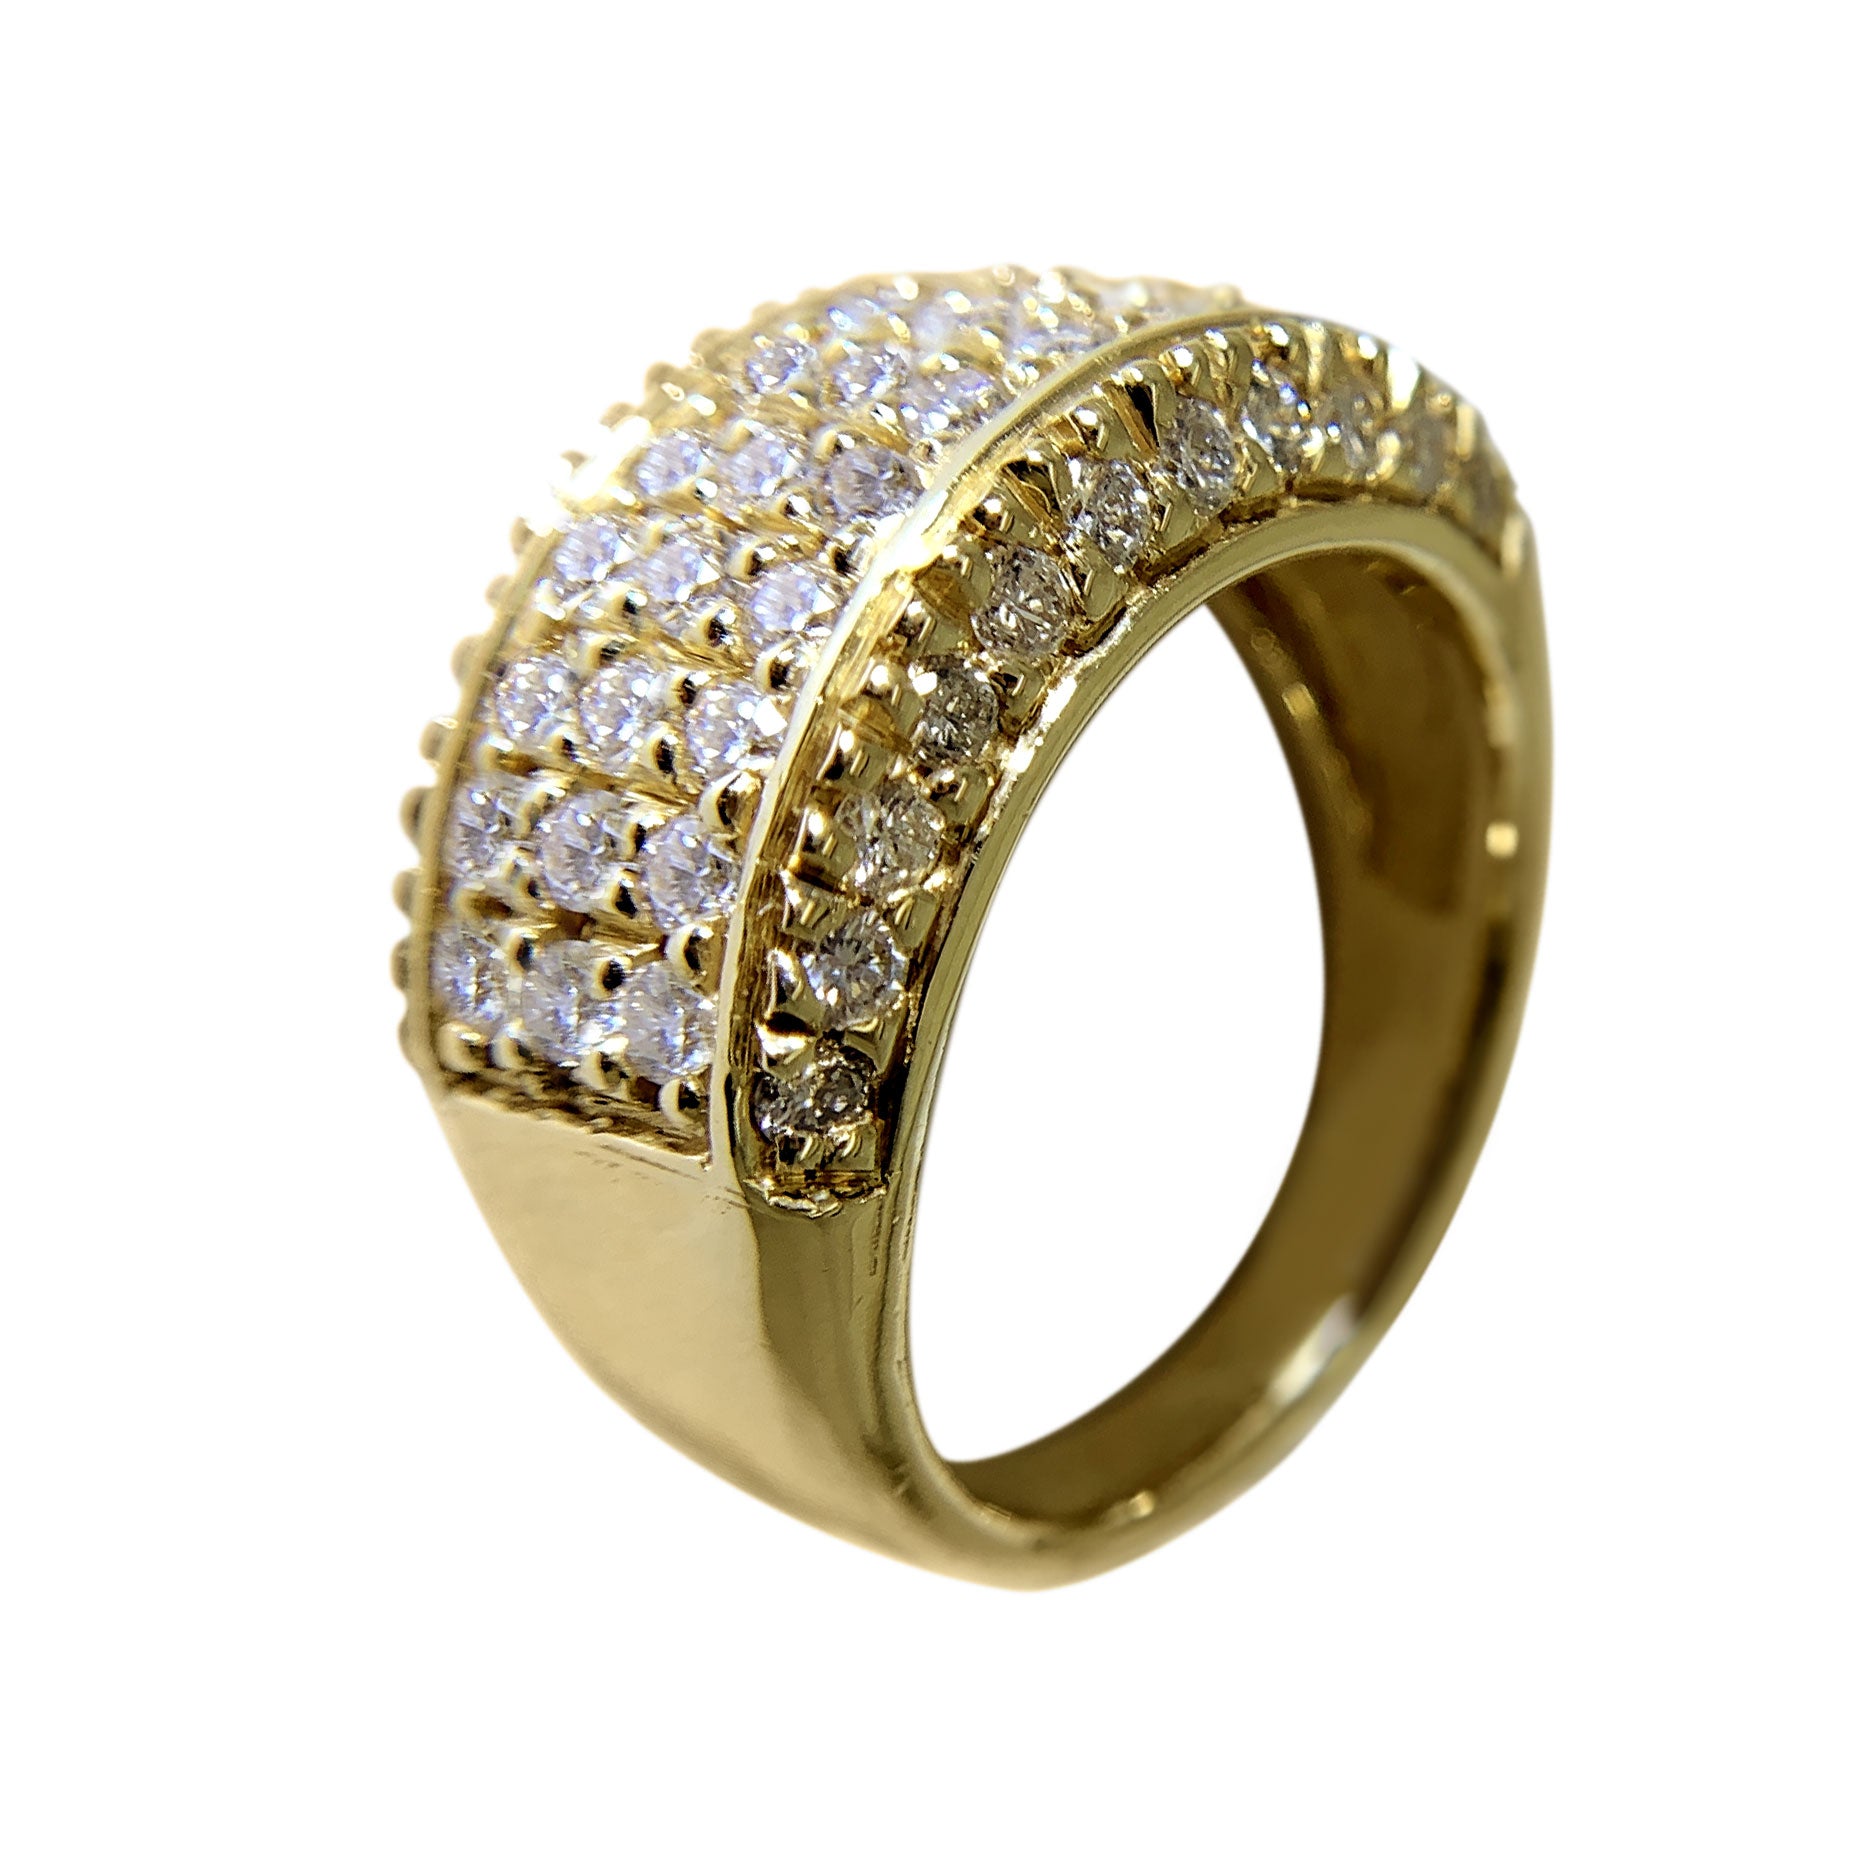 14 KT YELLOW GOLD - GORGEOUS MENS RING WITH ROUND DIAMONDS - 2.68 CT